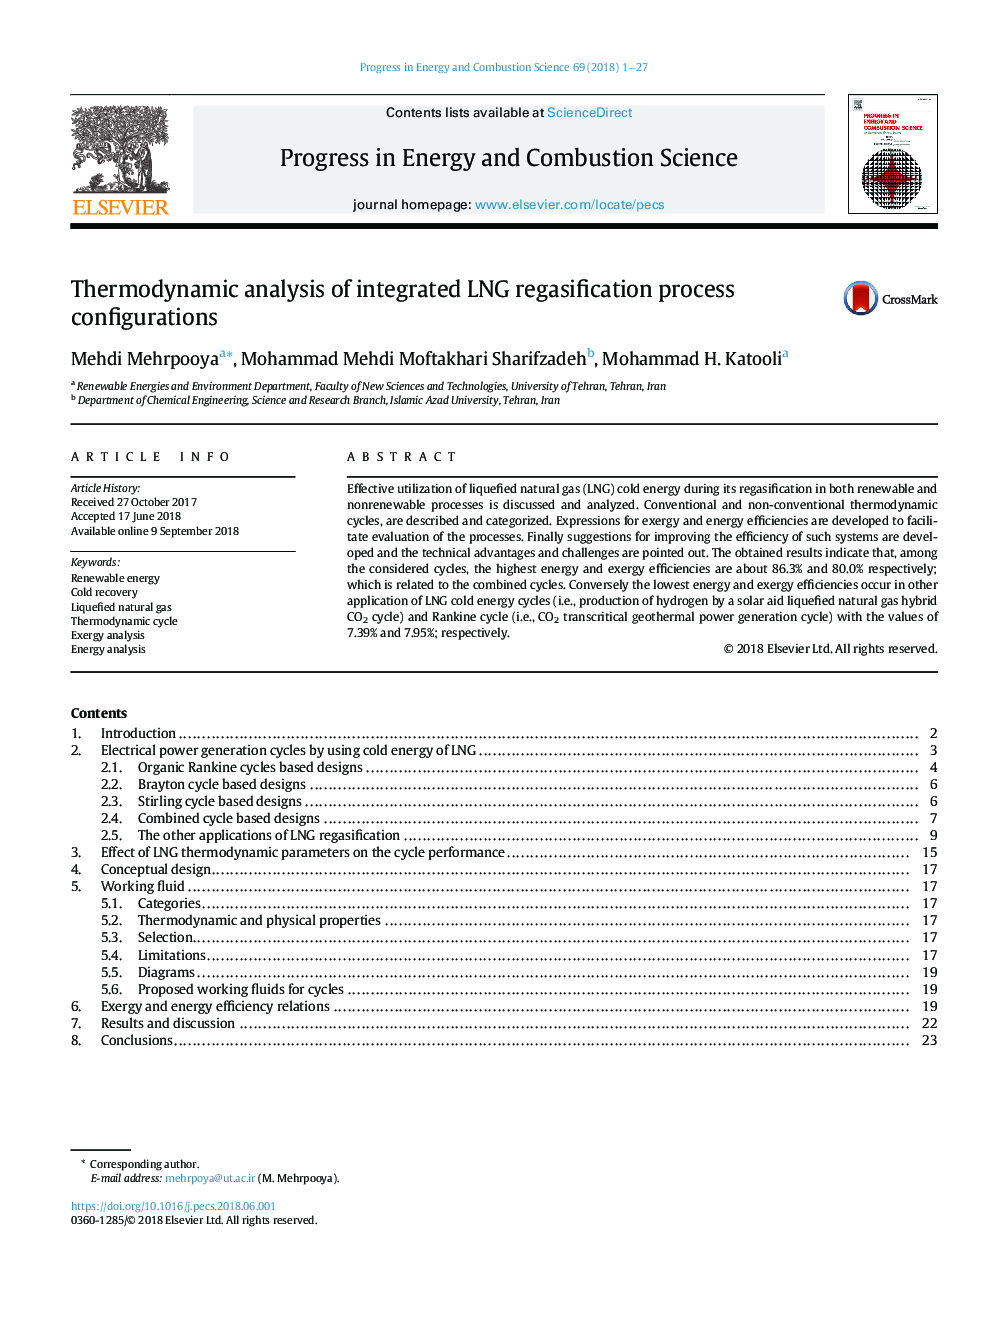 Thermodynamic analysis of integrated LNG regasification process configurations